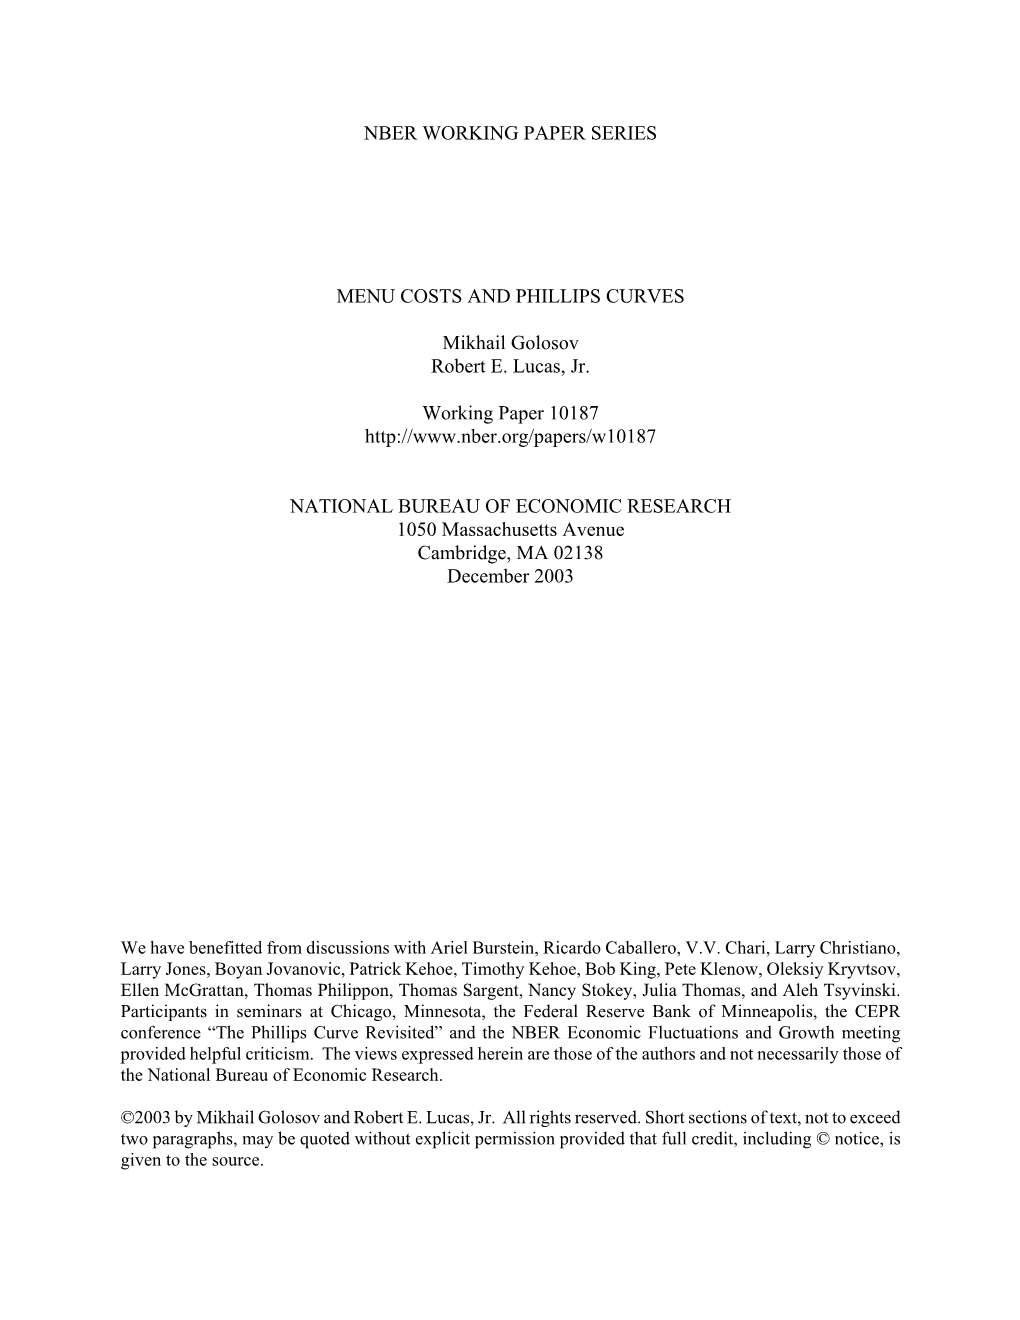 NBER WORKING PAPER SERIES MENU COSTS and PHILLIPS CURVES Mikhail Golosov